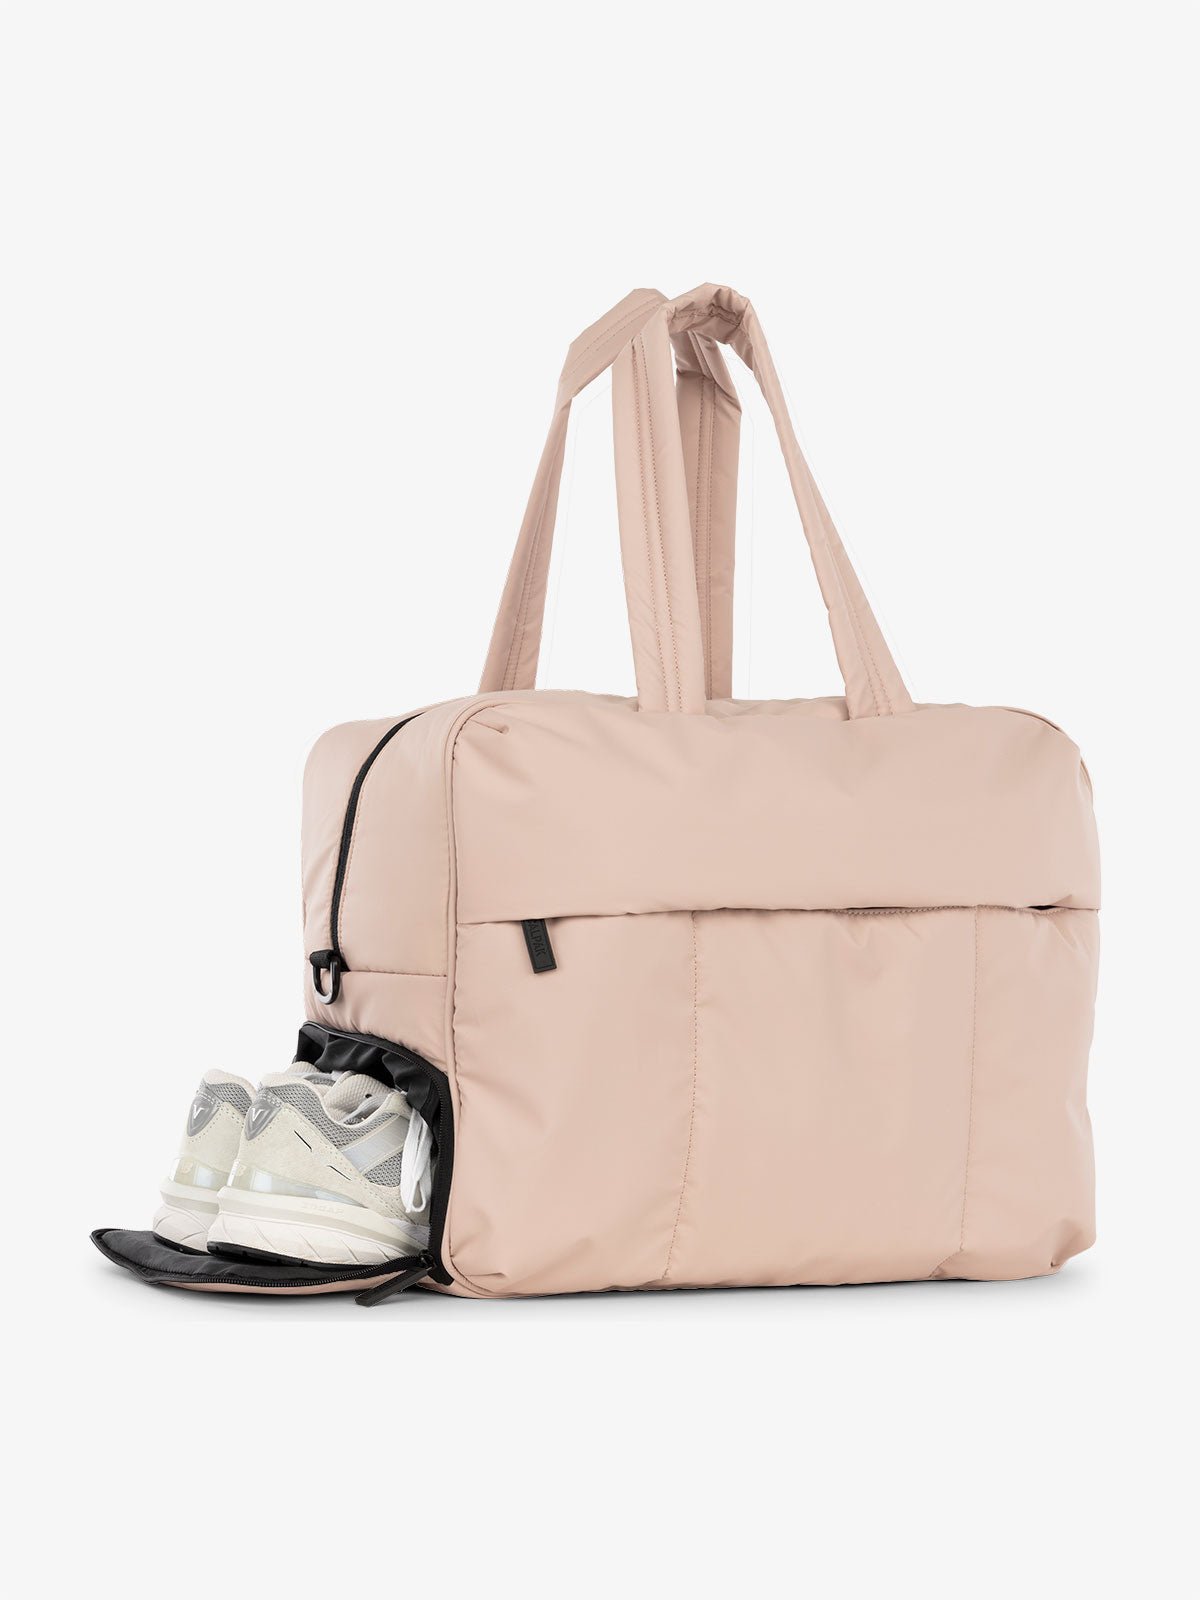 CALPAK Luka large duffel bag with side shoe compartment and dual handles in rose quartz